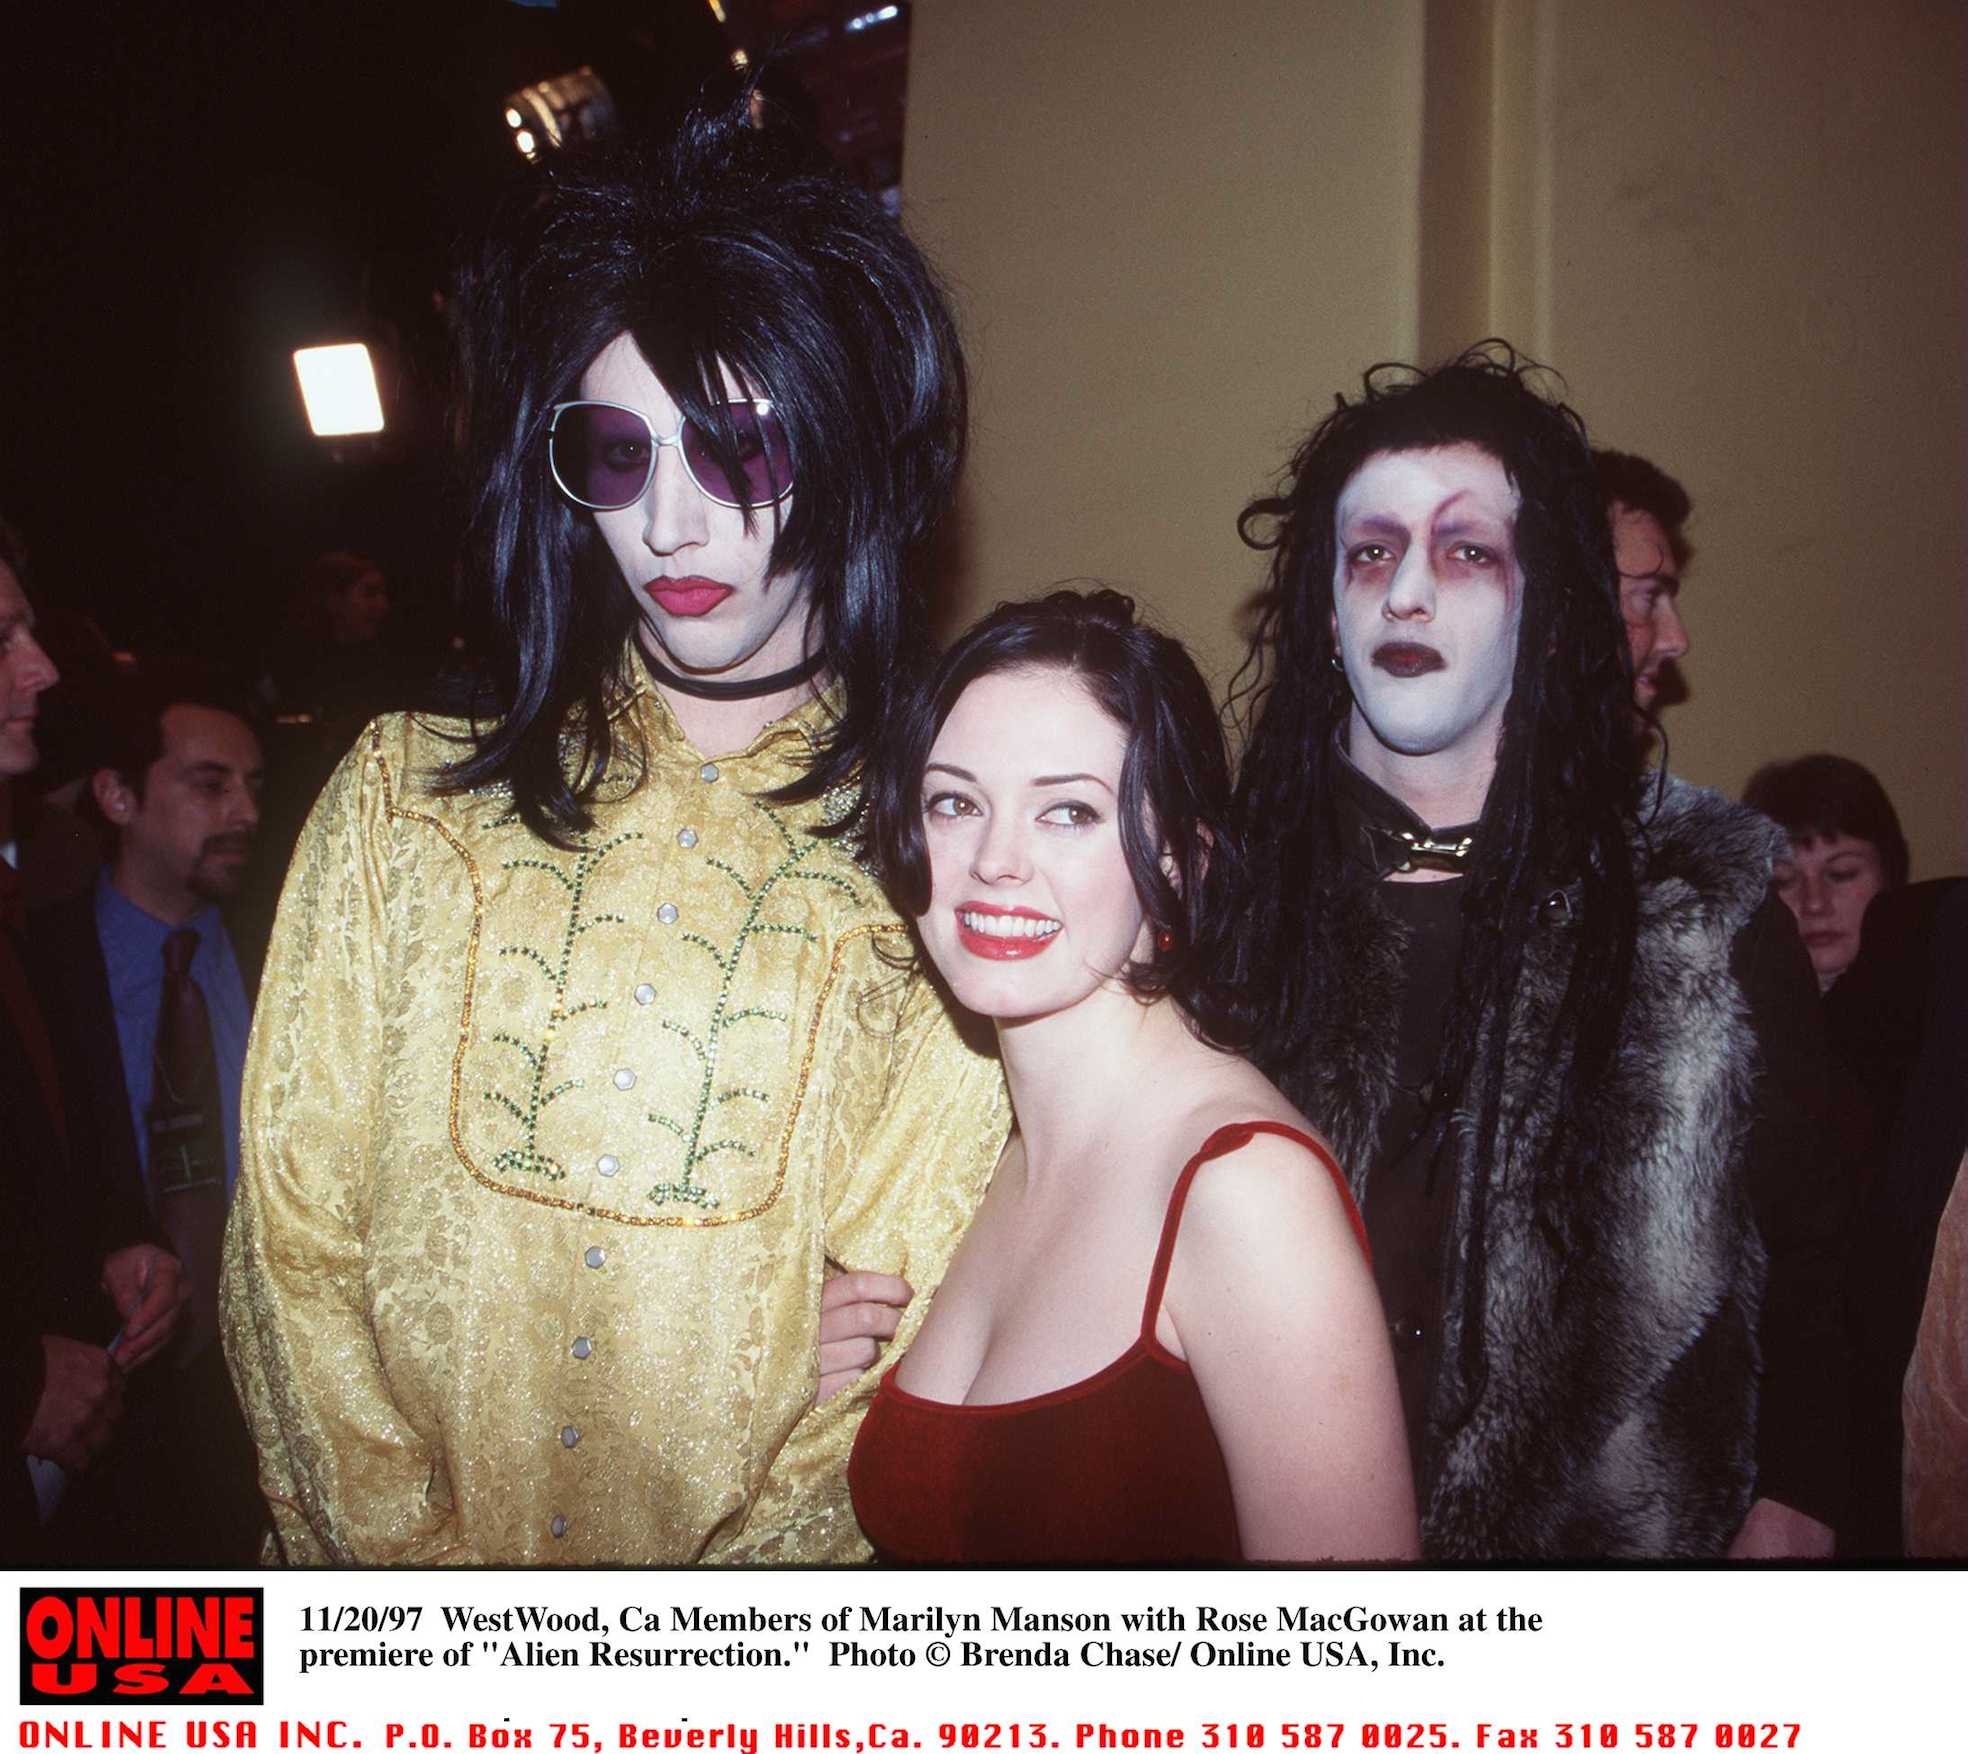 Marilyn Manson and Rose McGowan in 1997 